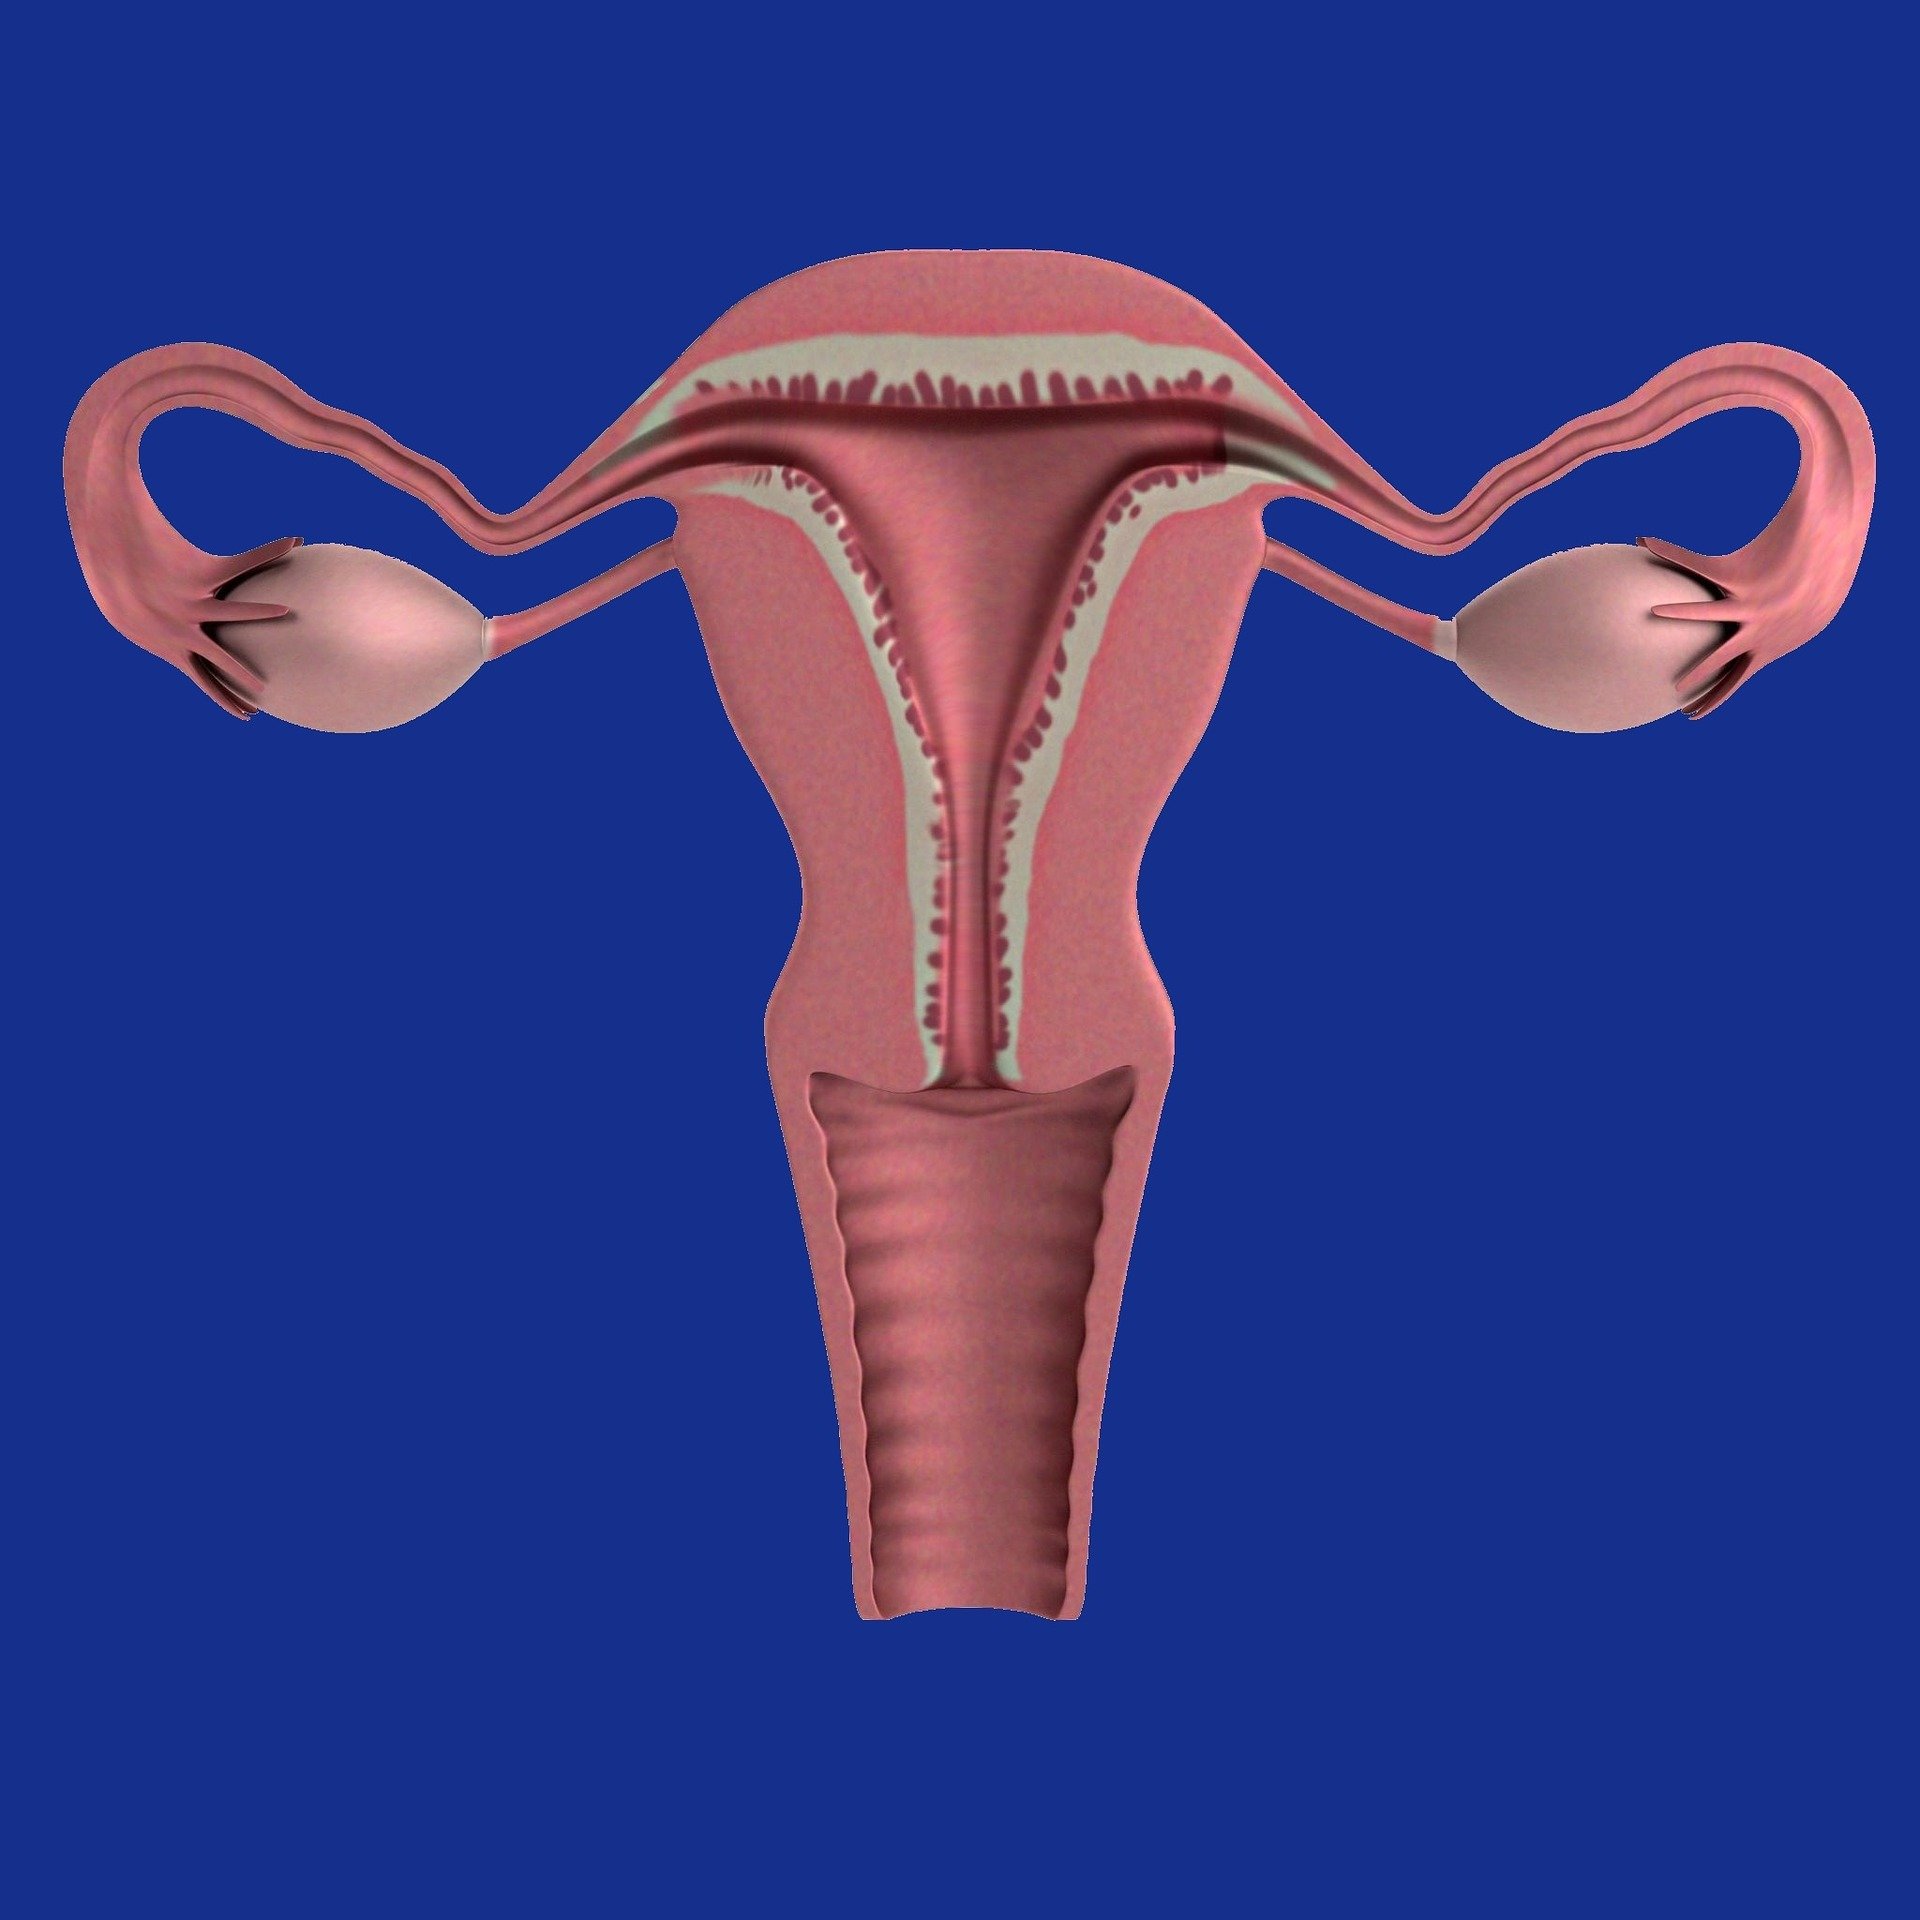 Less Surveillance Needed For Simple Ovarian Cysts